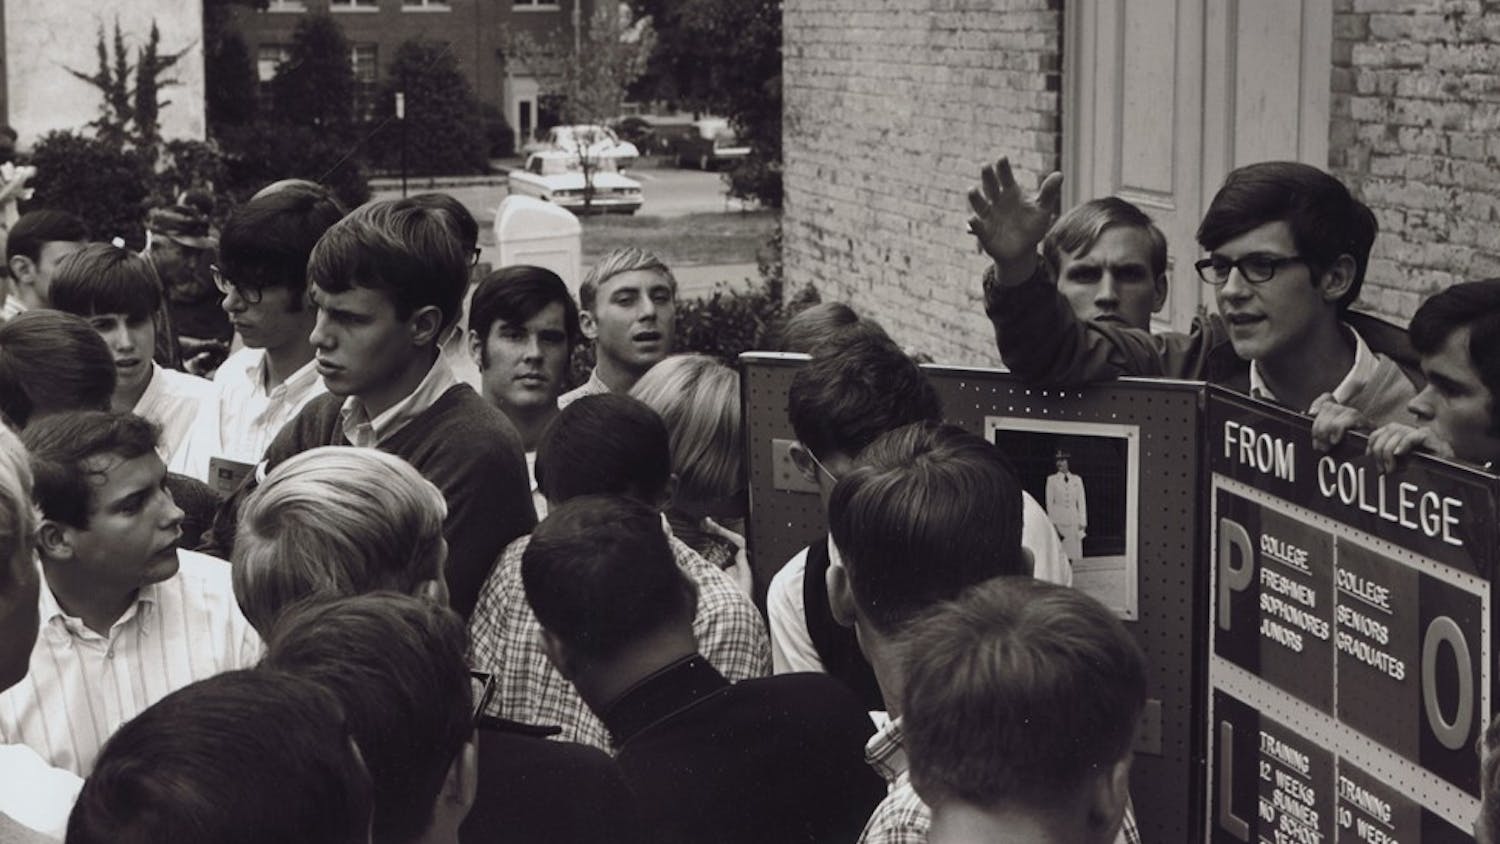 The Kent State March, Campus Y protesters and Anne Queen (left to right) have contributed to the last 150 years of the Campus Y, a student organization focused on social justice. The Campus Y, which has been at UNC since 1860, started dealing with social justice issues during the 1950s, when racial integration started.
